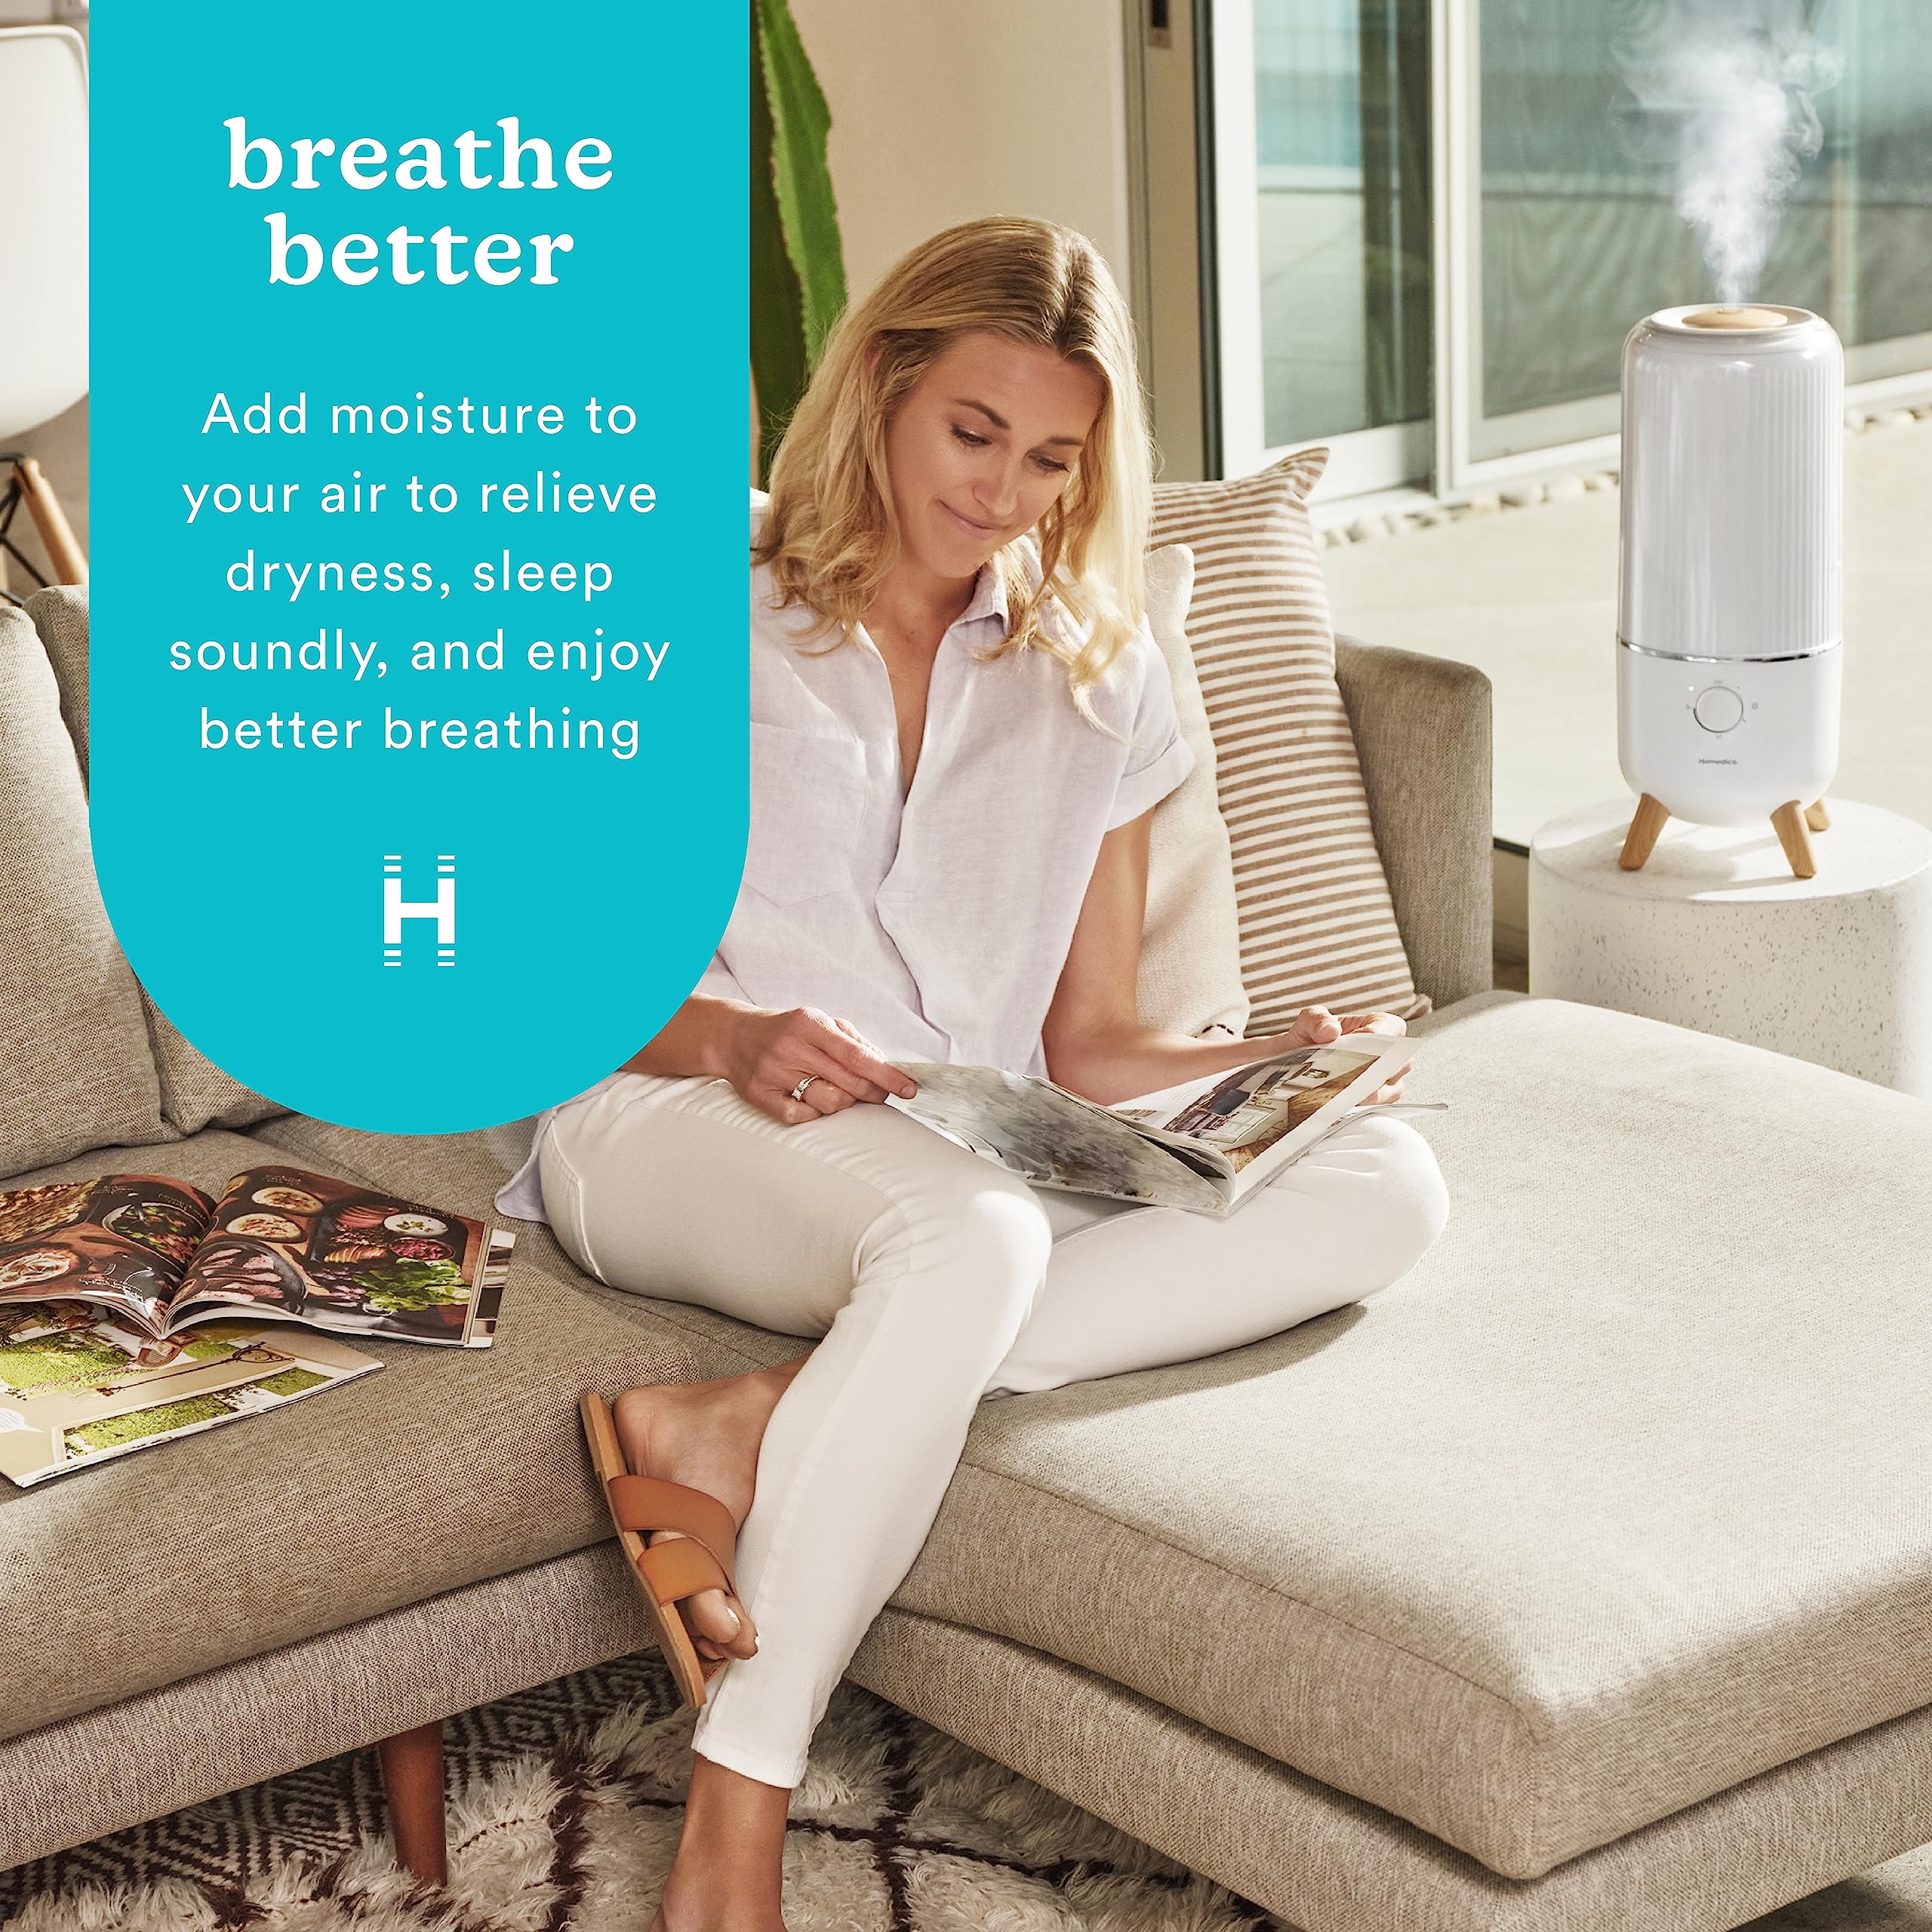 Homedics Ultrasonic Humidifier, Bedrooms and Home Offices, 0.97-Gallon Tank, 45-Hour Runtime, Visible Ultra-Quiet Cool Mist, Aromatherapy, Demineralization Cartridge, Night-Light, Auto-Off, White